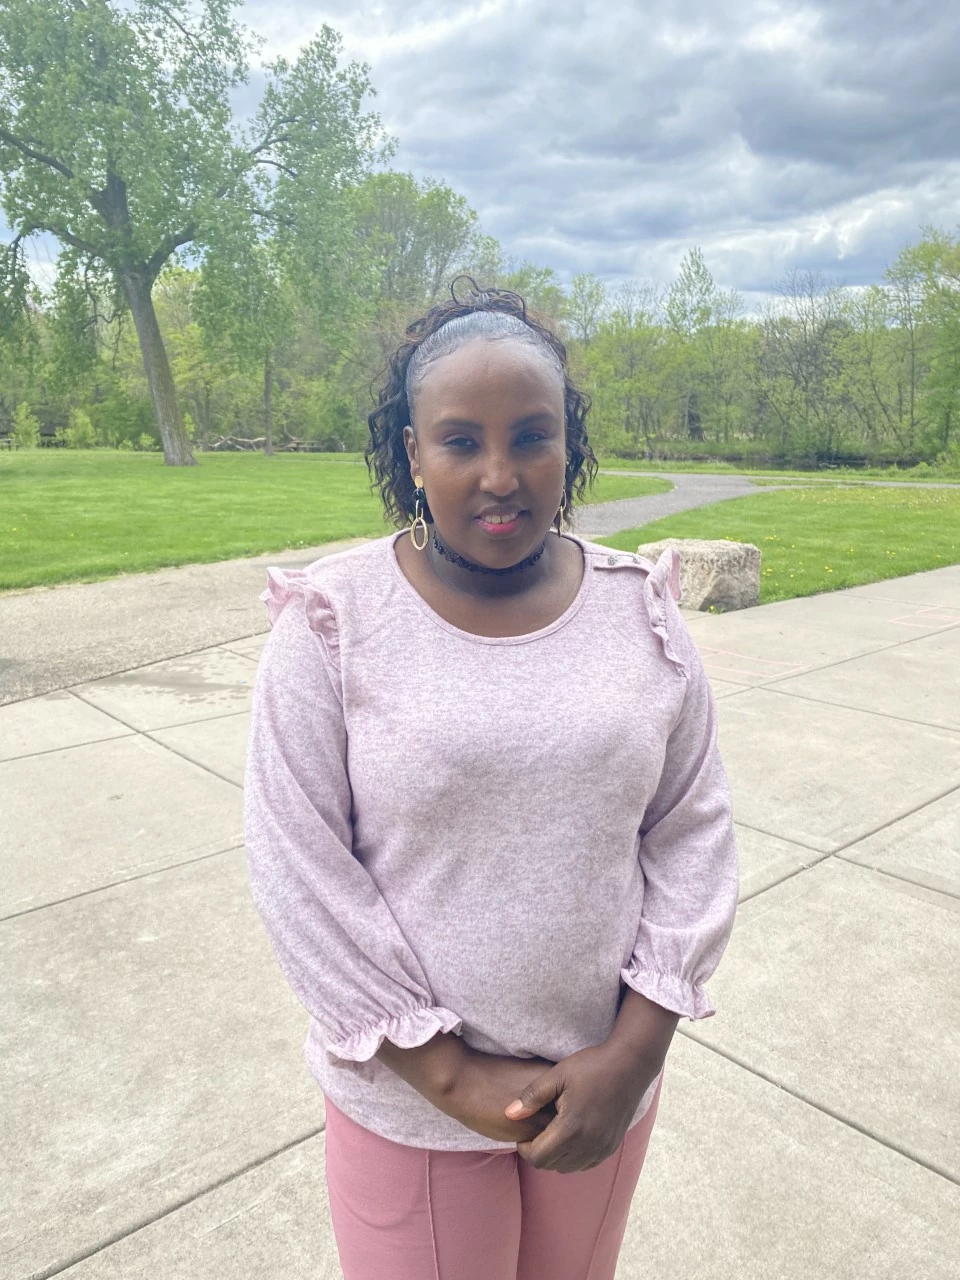 Meet our October 2022 Caregiver of the Month, Tolole! She becomes a part of her client’s family and has such a special heart. Tolole enjoys shopping, going to church, and being with her kids. Way to go Tolole!